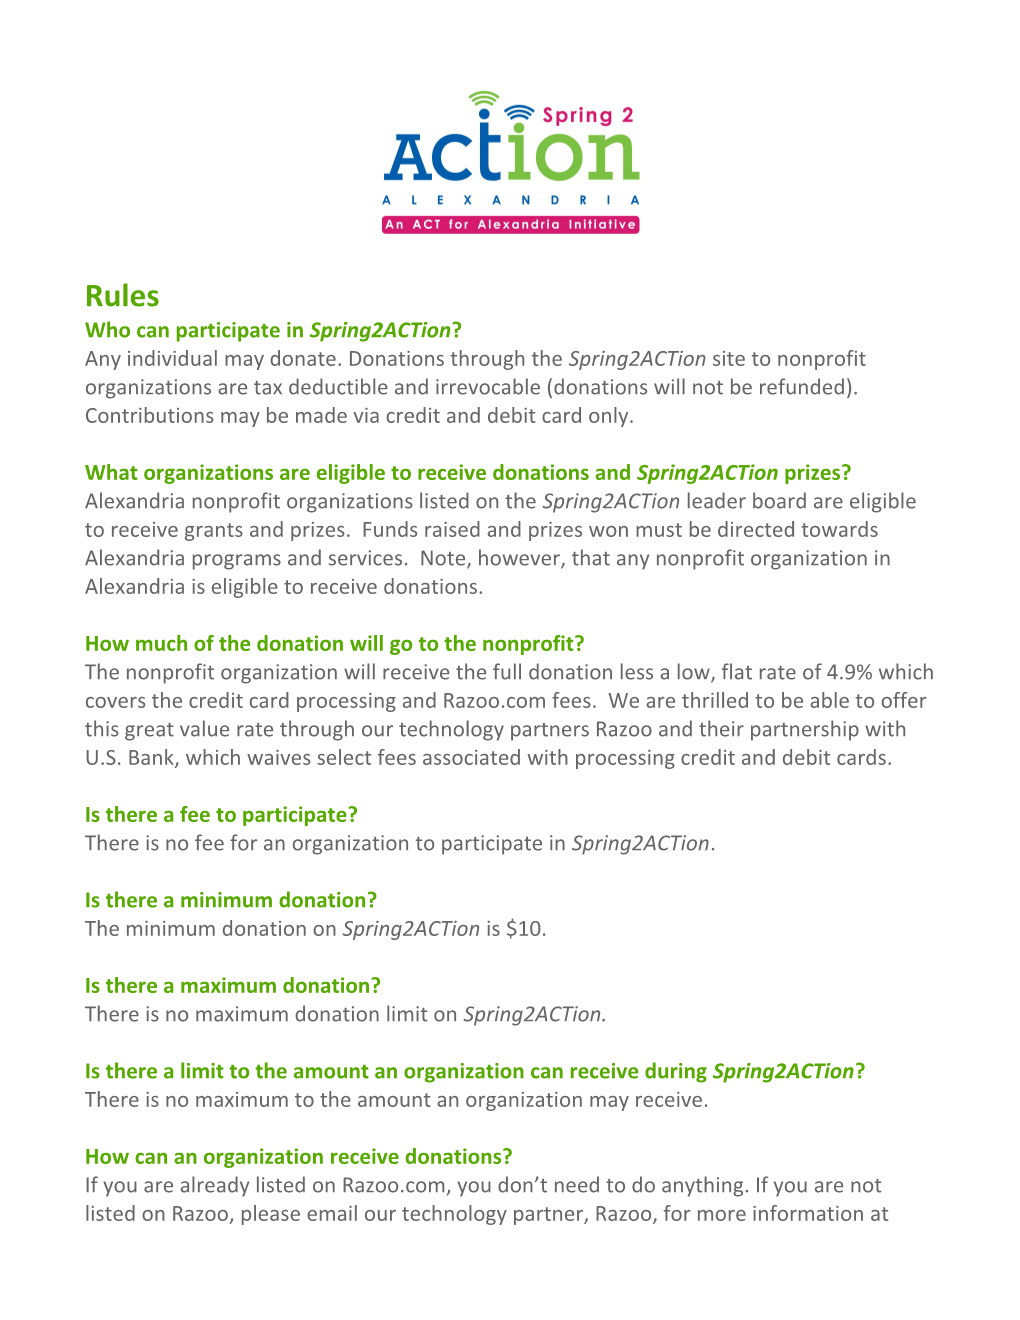 What Organizations Are Eligible to Receive Donations and Spring2action Prizes?